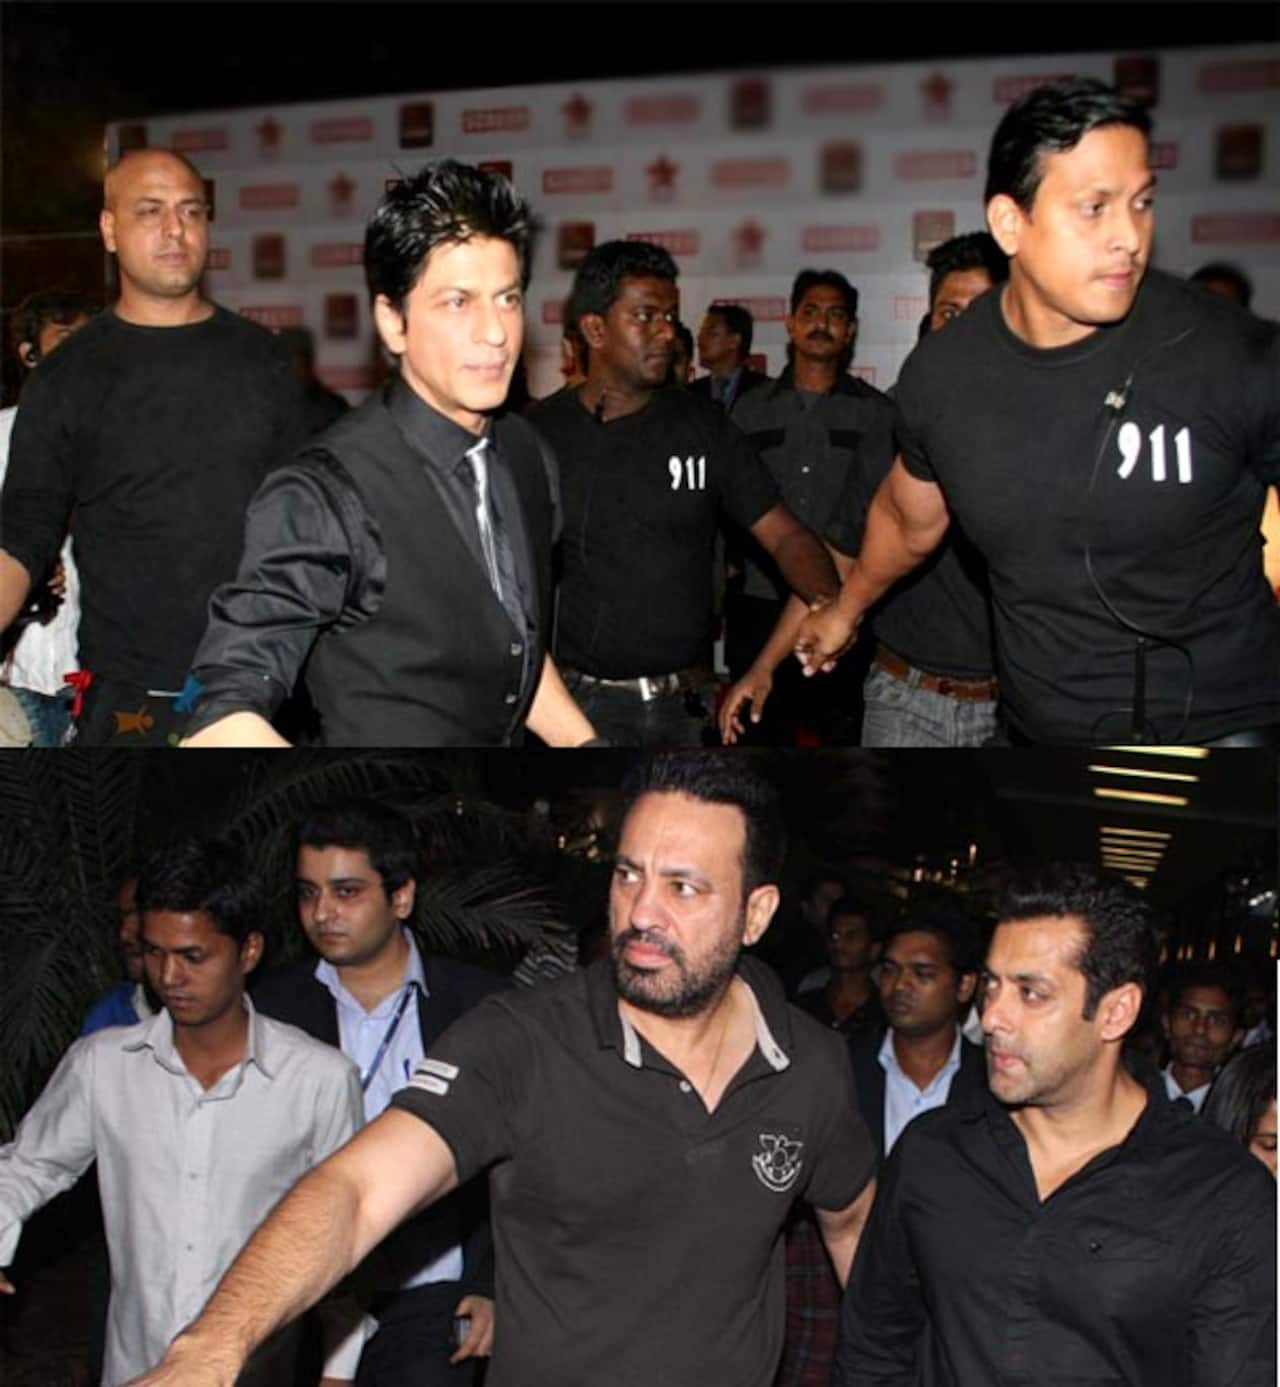 Here is why Salman Khan, Shah Rukh Khan and other actors need tough security around them all the time!